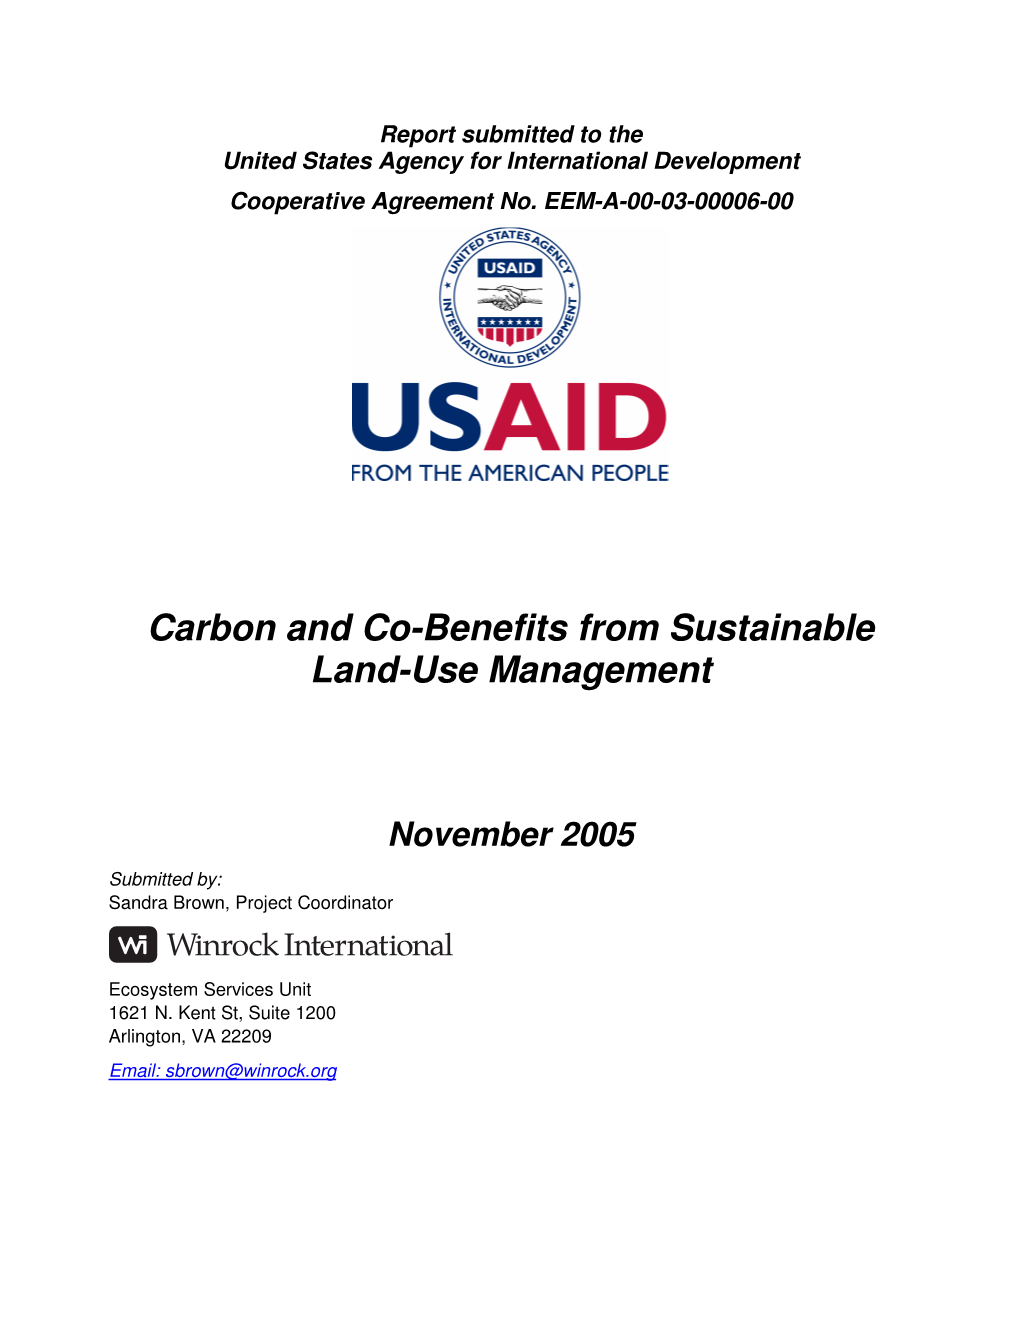 Carbon and Co-Benefits from Sustainable Land-Use Management